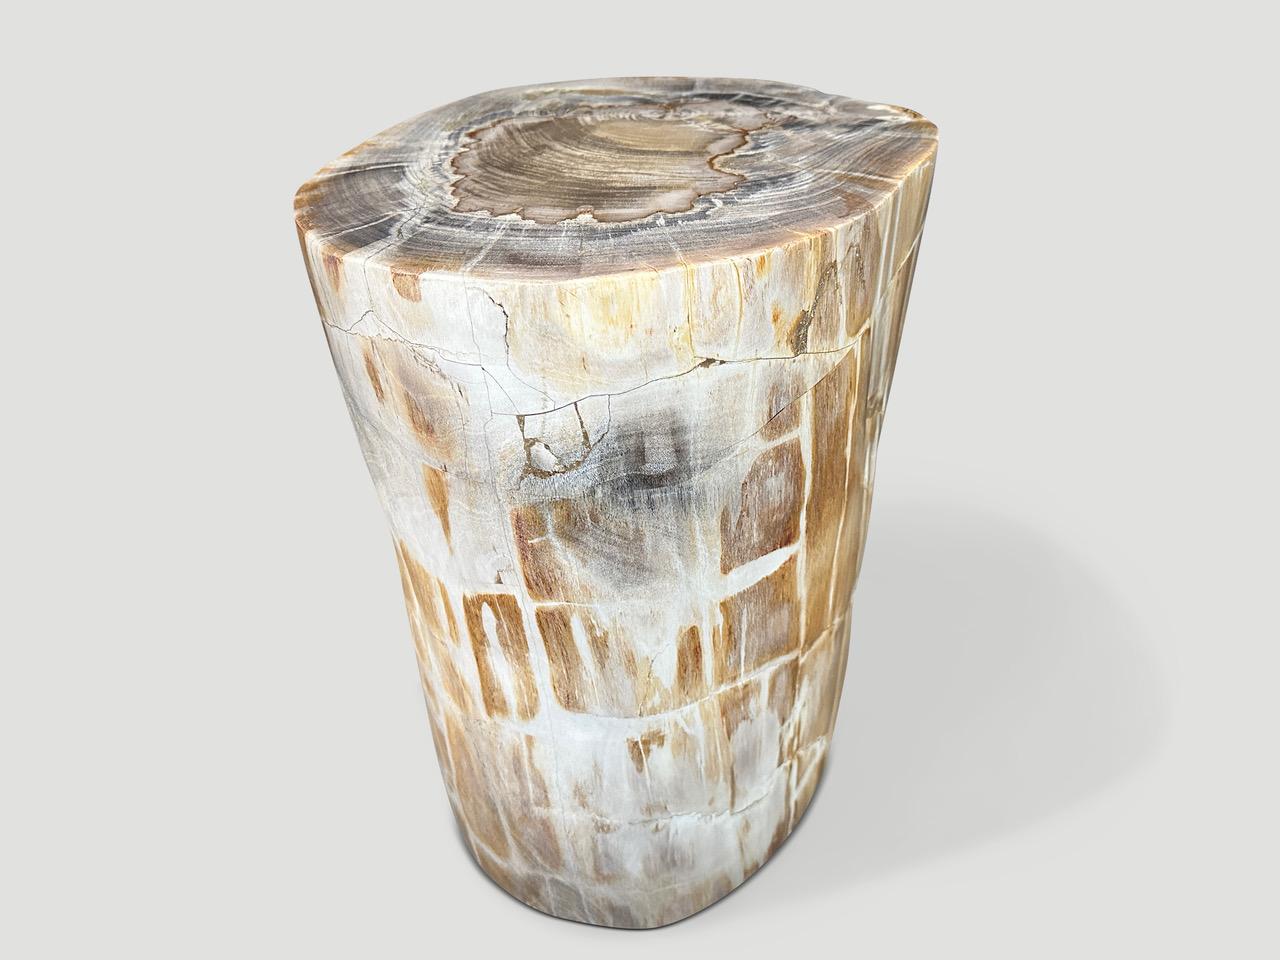 Impressive beautiful tones on this high quality super smooth, tall petrified wood side table or pedestal. It’s fascinating how Mother Nature produces these stunning 40 million year old petrified teak logs with such contrasting colors and natural